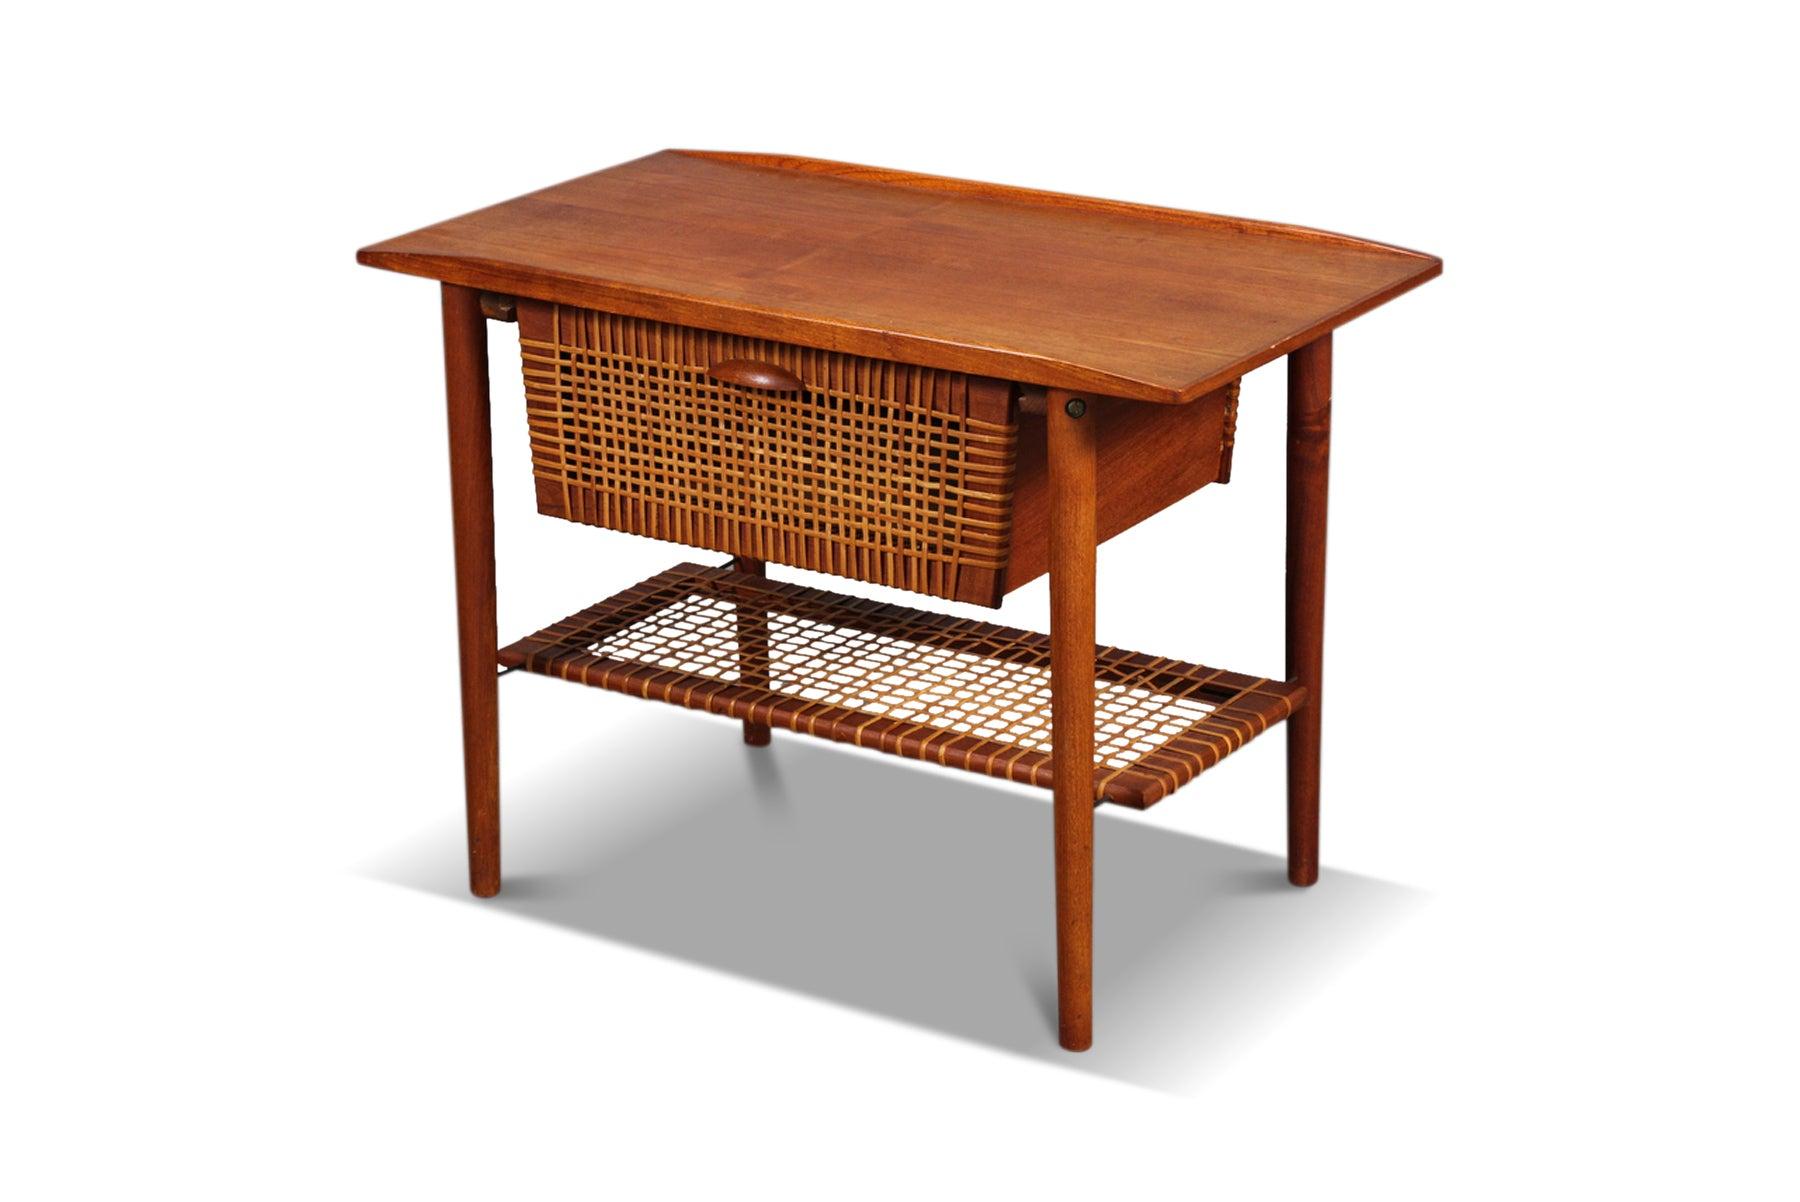 Other Danish Modern Teak + Cane Side Table With Drawer